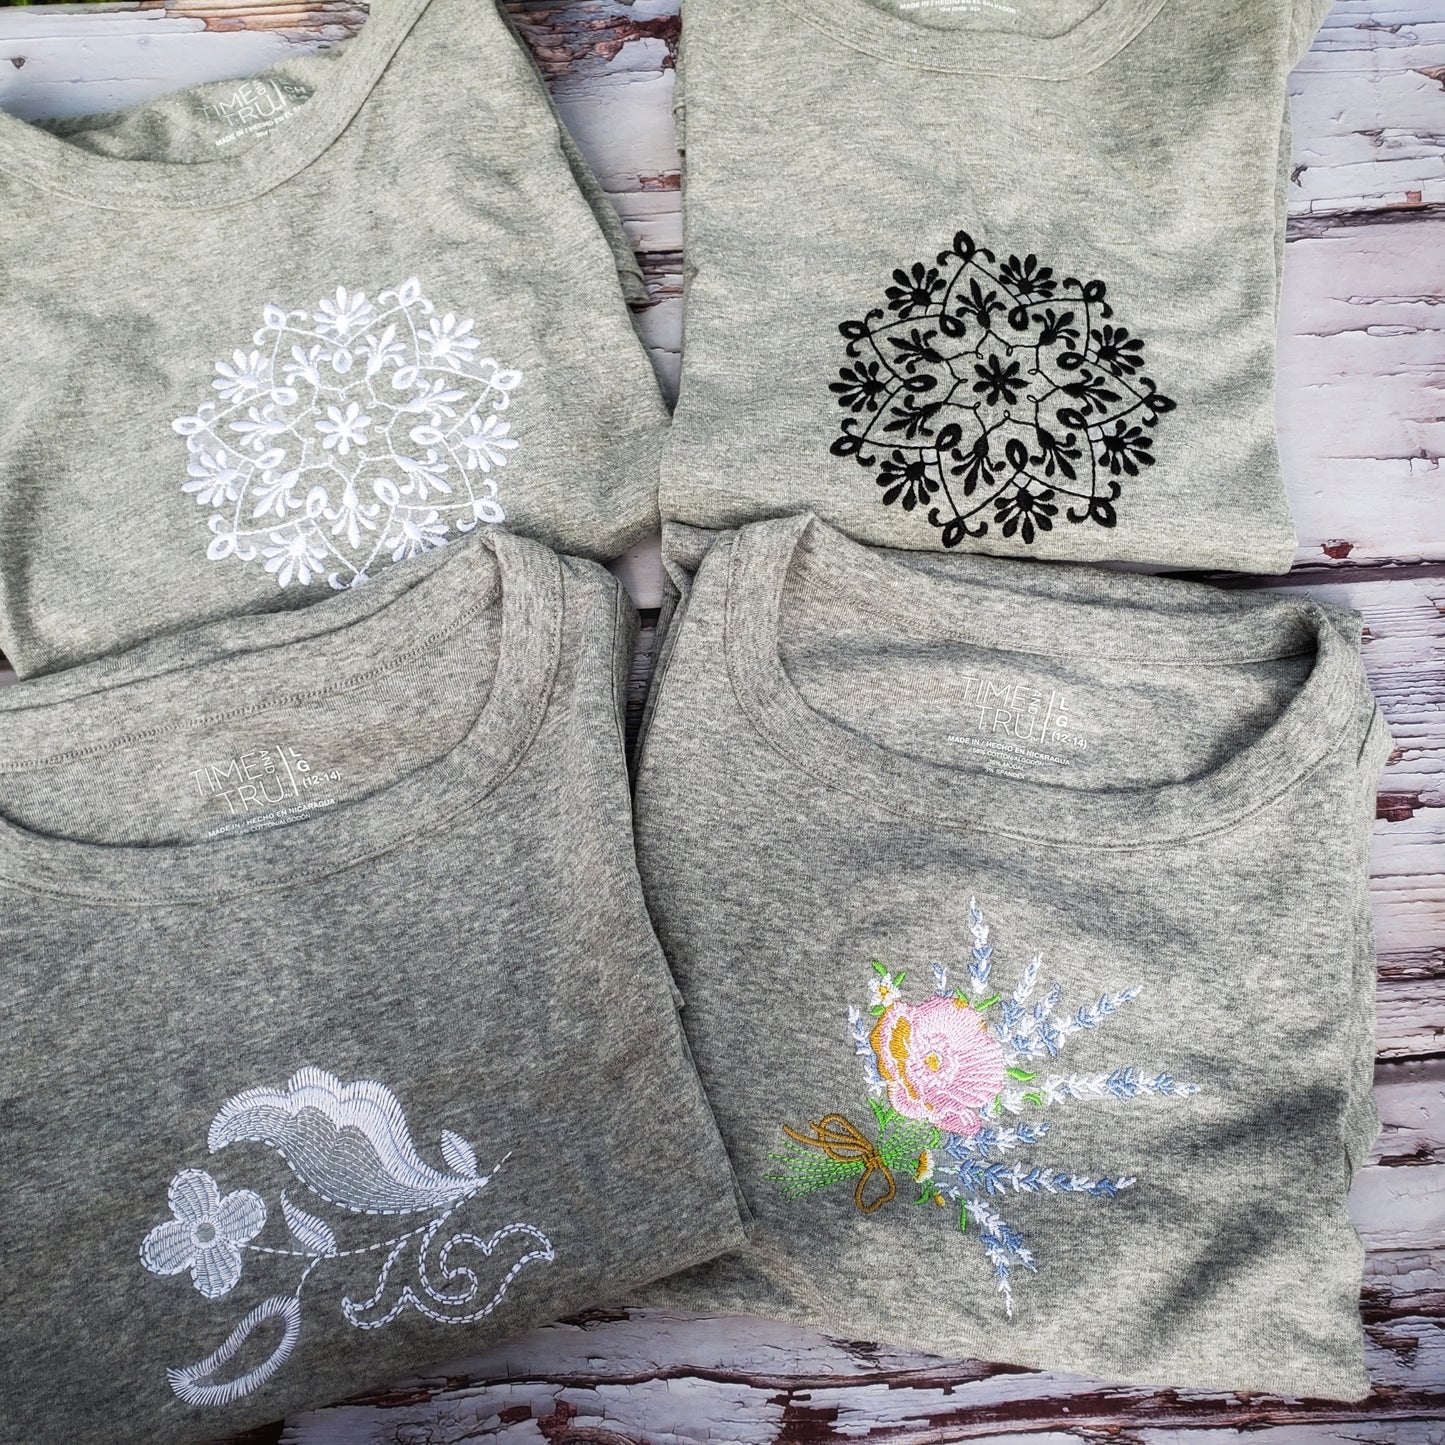 Tshirts embroidered